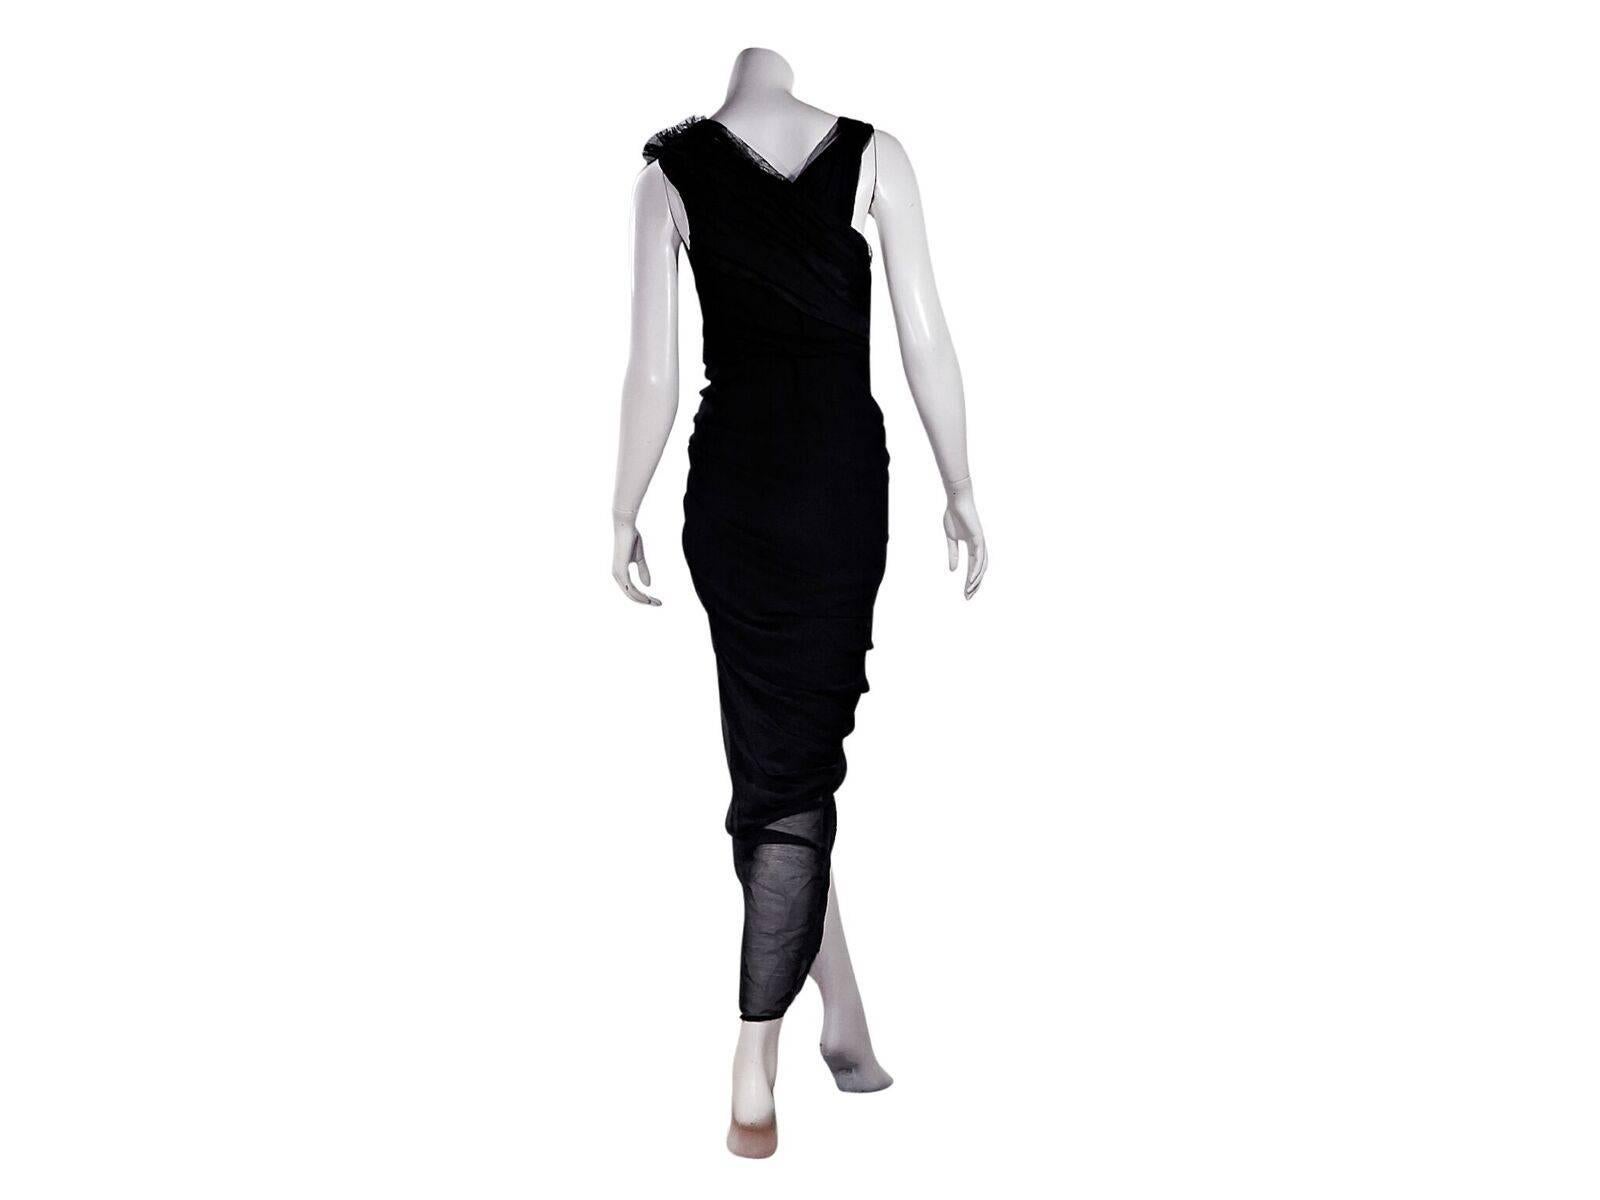 Product details:  Black silk and lace dress by 3.1 Phillip Lim.  Deep v-neck.  Asymmetrical sleeveless design.  Exposed side zip closure.  Ruching creates a flattering silhouette.  32